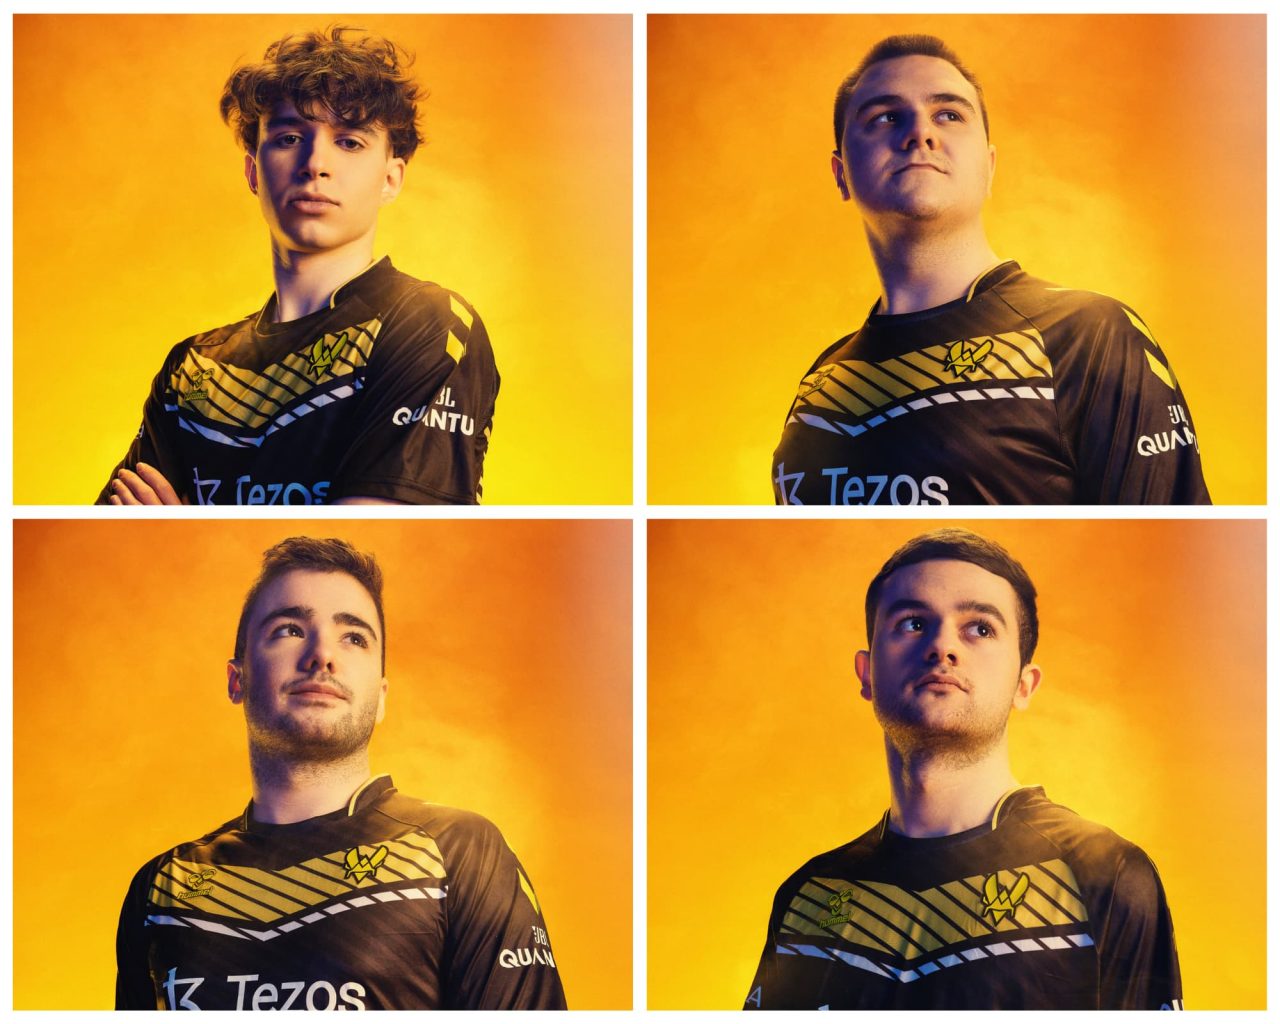 TEAM VITALITYS FRENCH ROCKET LEAGUE TEAM WILL BE BACK AT THE SAN DIEGO MAJOR FROM APRIL 6TH TO 9TH 2023 Team Vitality